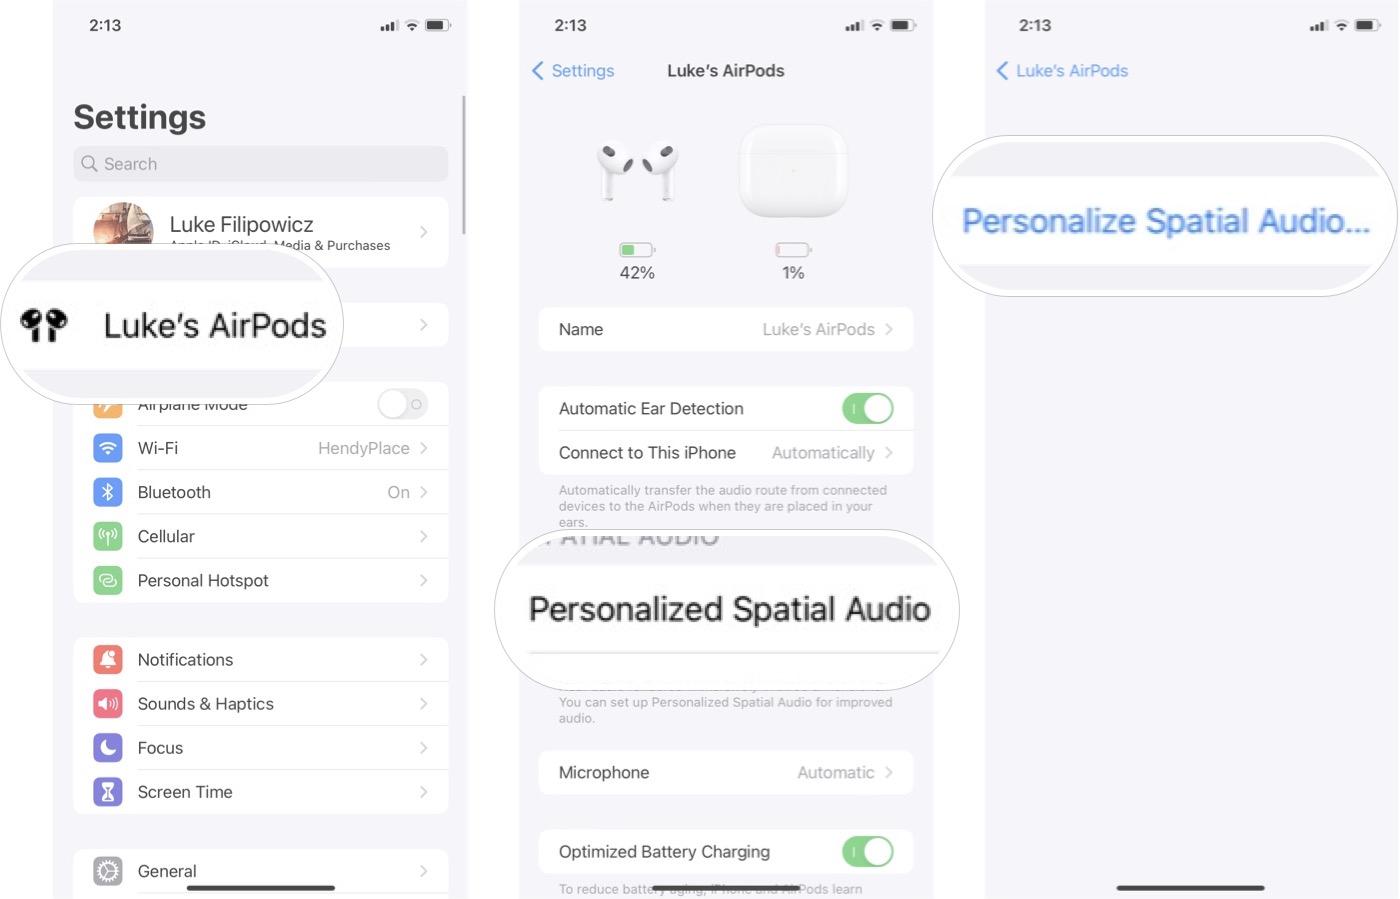 How to set up personalized spatial audio in iOS 16: Launch settings, tap your AirPods, tap personalized spatial audio, and then tap personalize spatial audio.